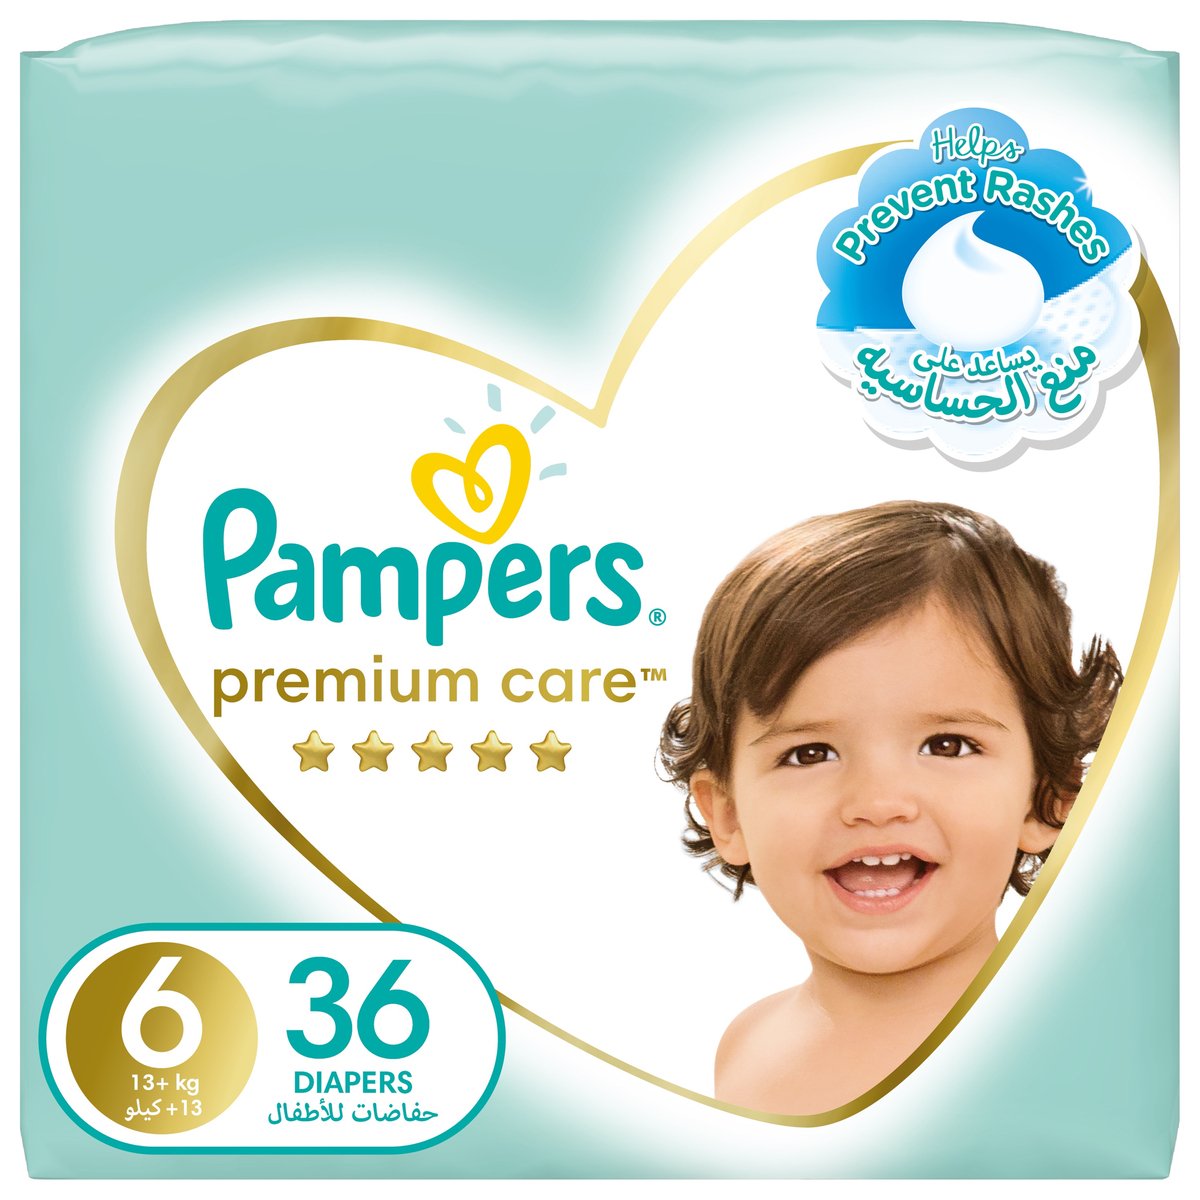 Conjugate Occupy complement Pampers Premium Care Diapers Size 6, 13+kg The Softest Diaper 36pcs Online  at Best Price | Baby Nappies | Lulu Oman